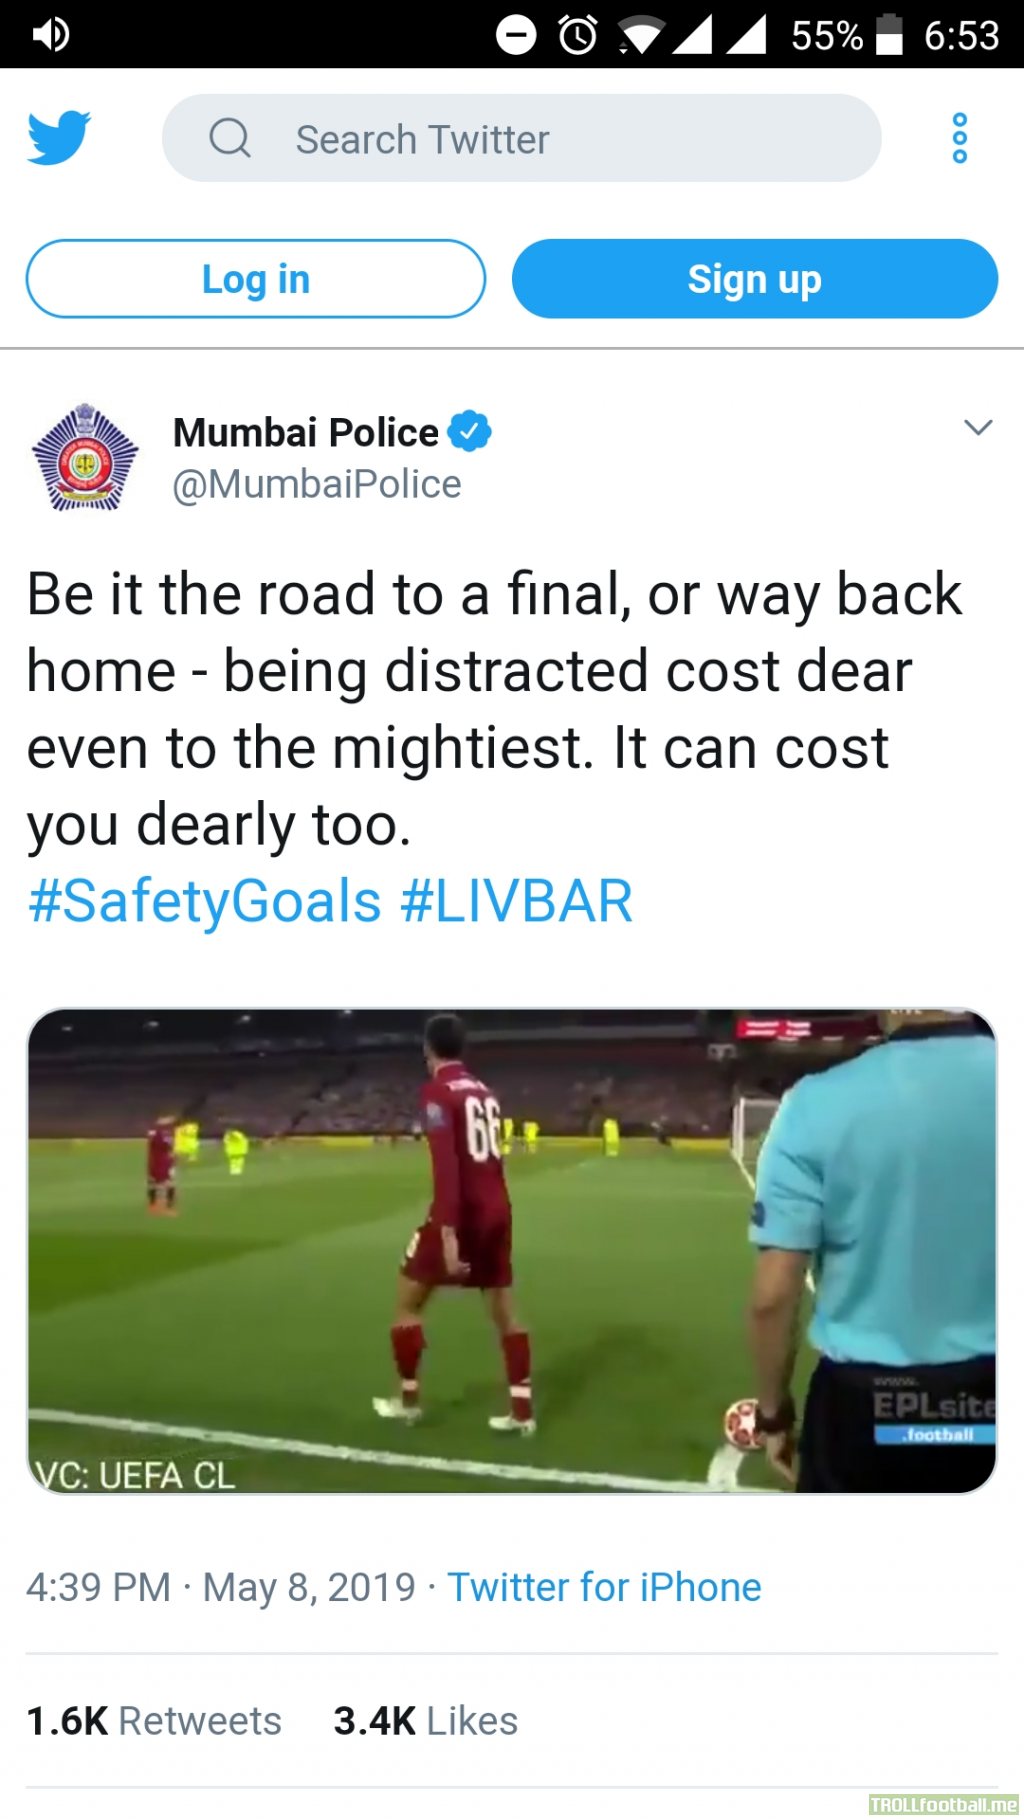 Mumbai police giving driving tips with the help of 4th Liverpool goal!